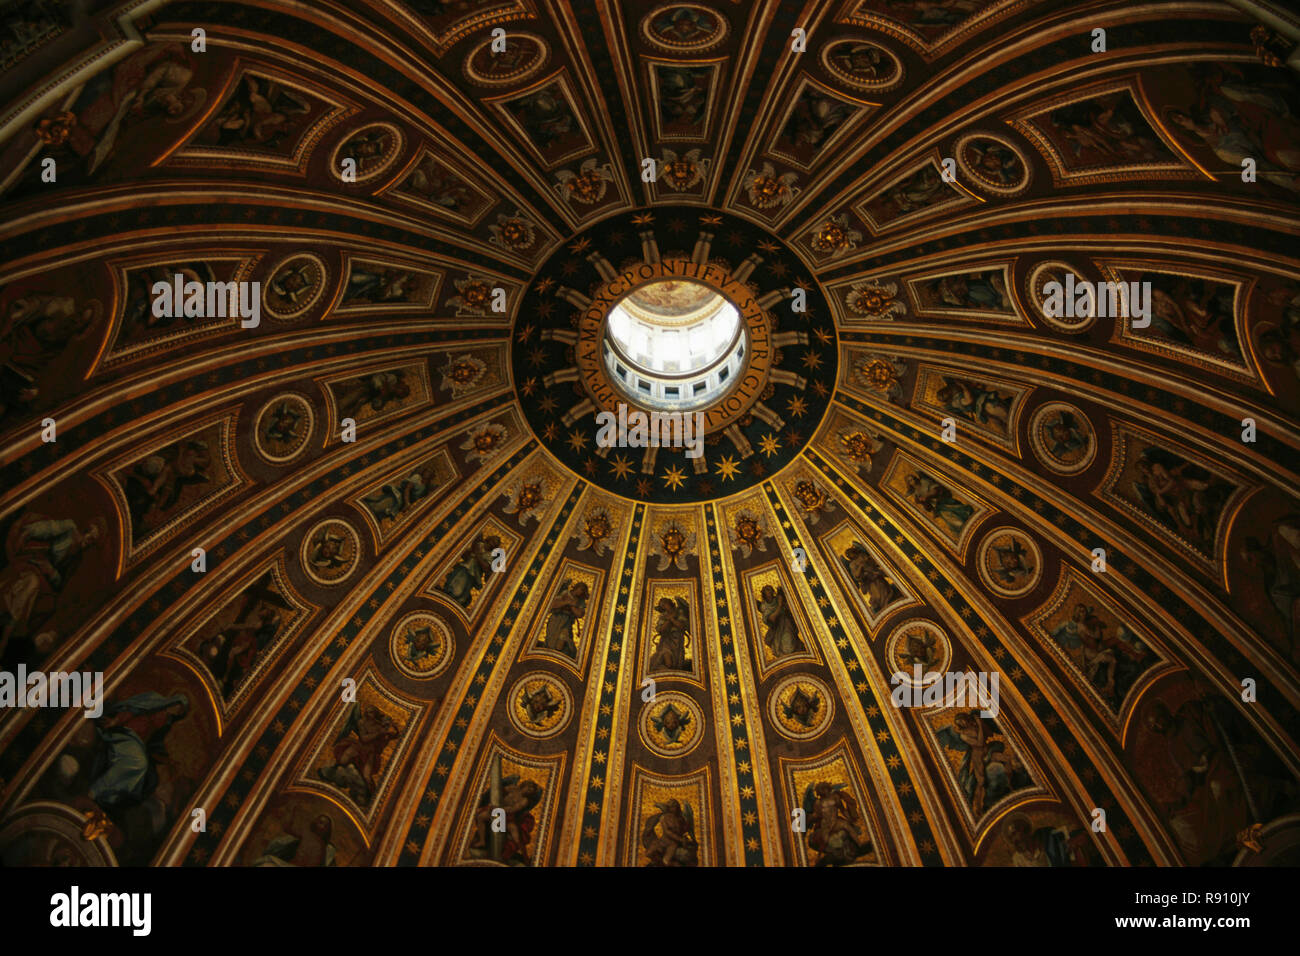 decorative ceiling of dome, st. peter's basilica, vatican city, italy Stock Photo